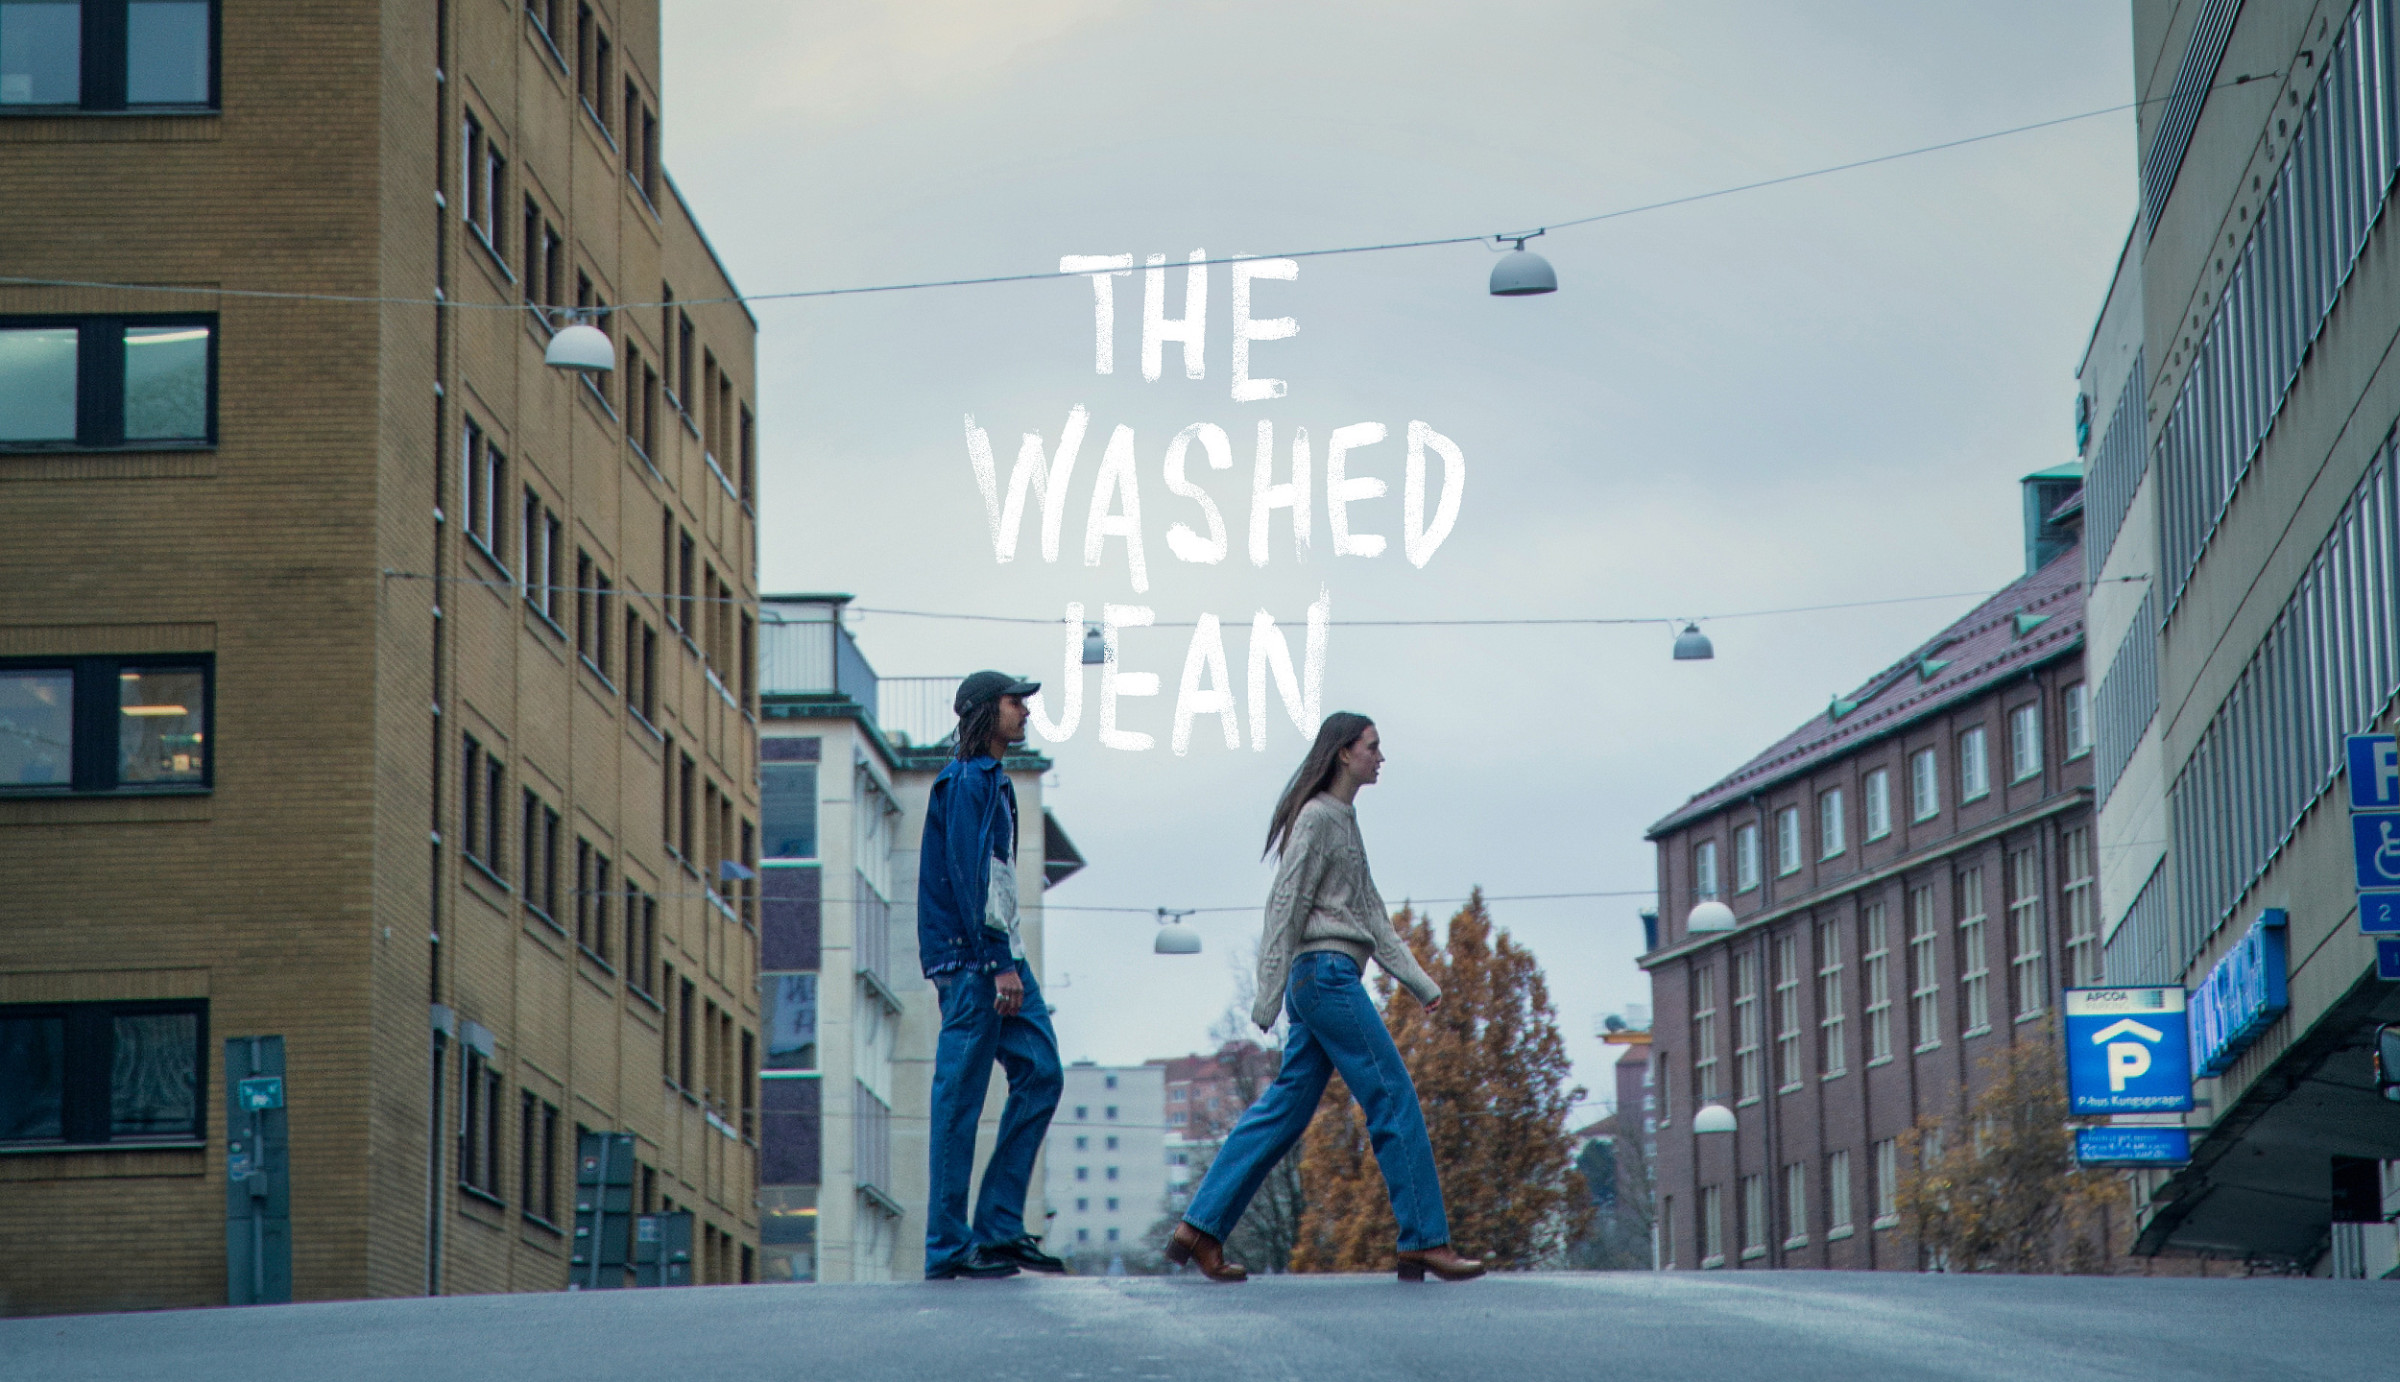 The washed Jean